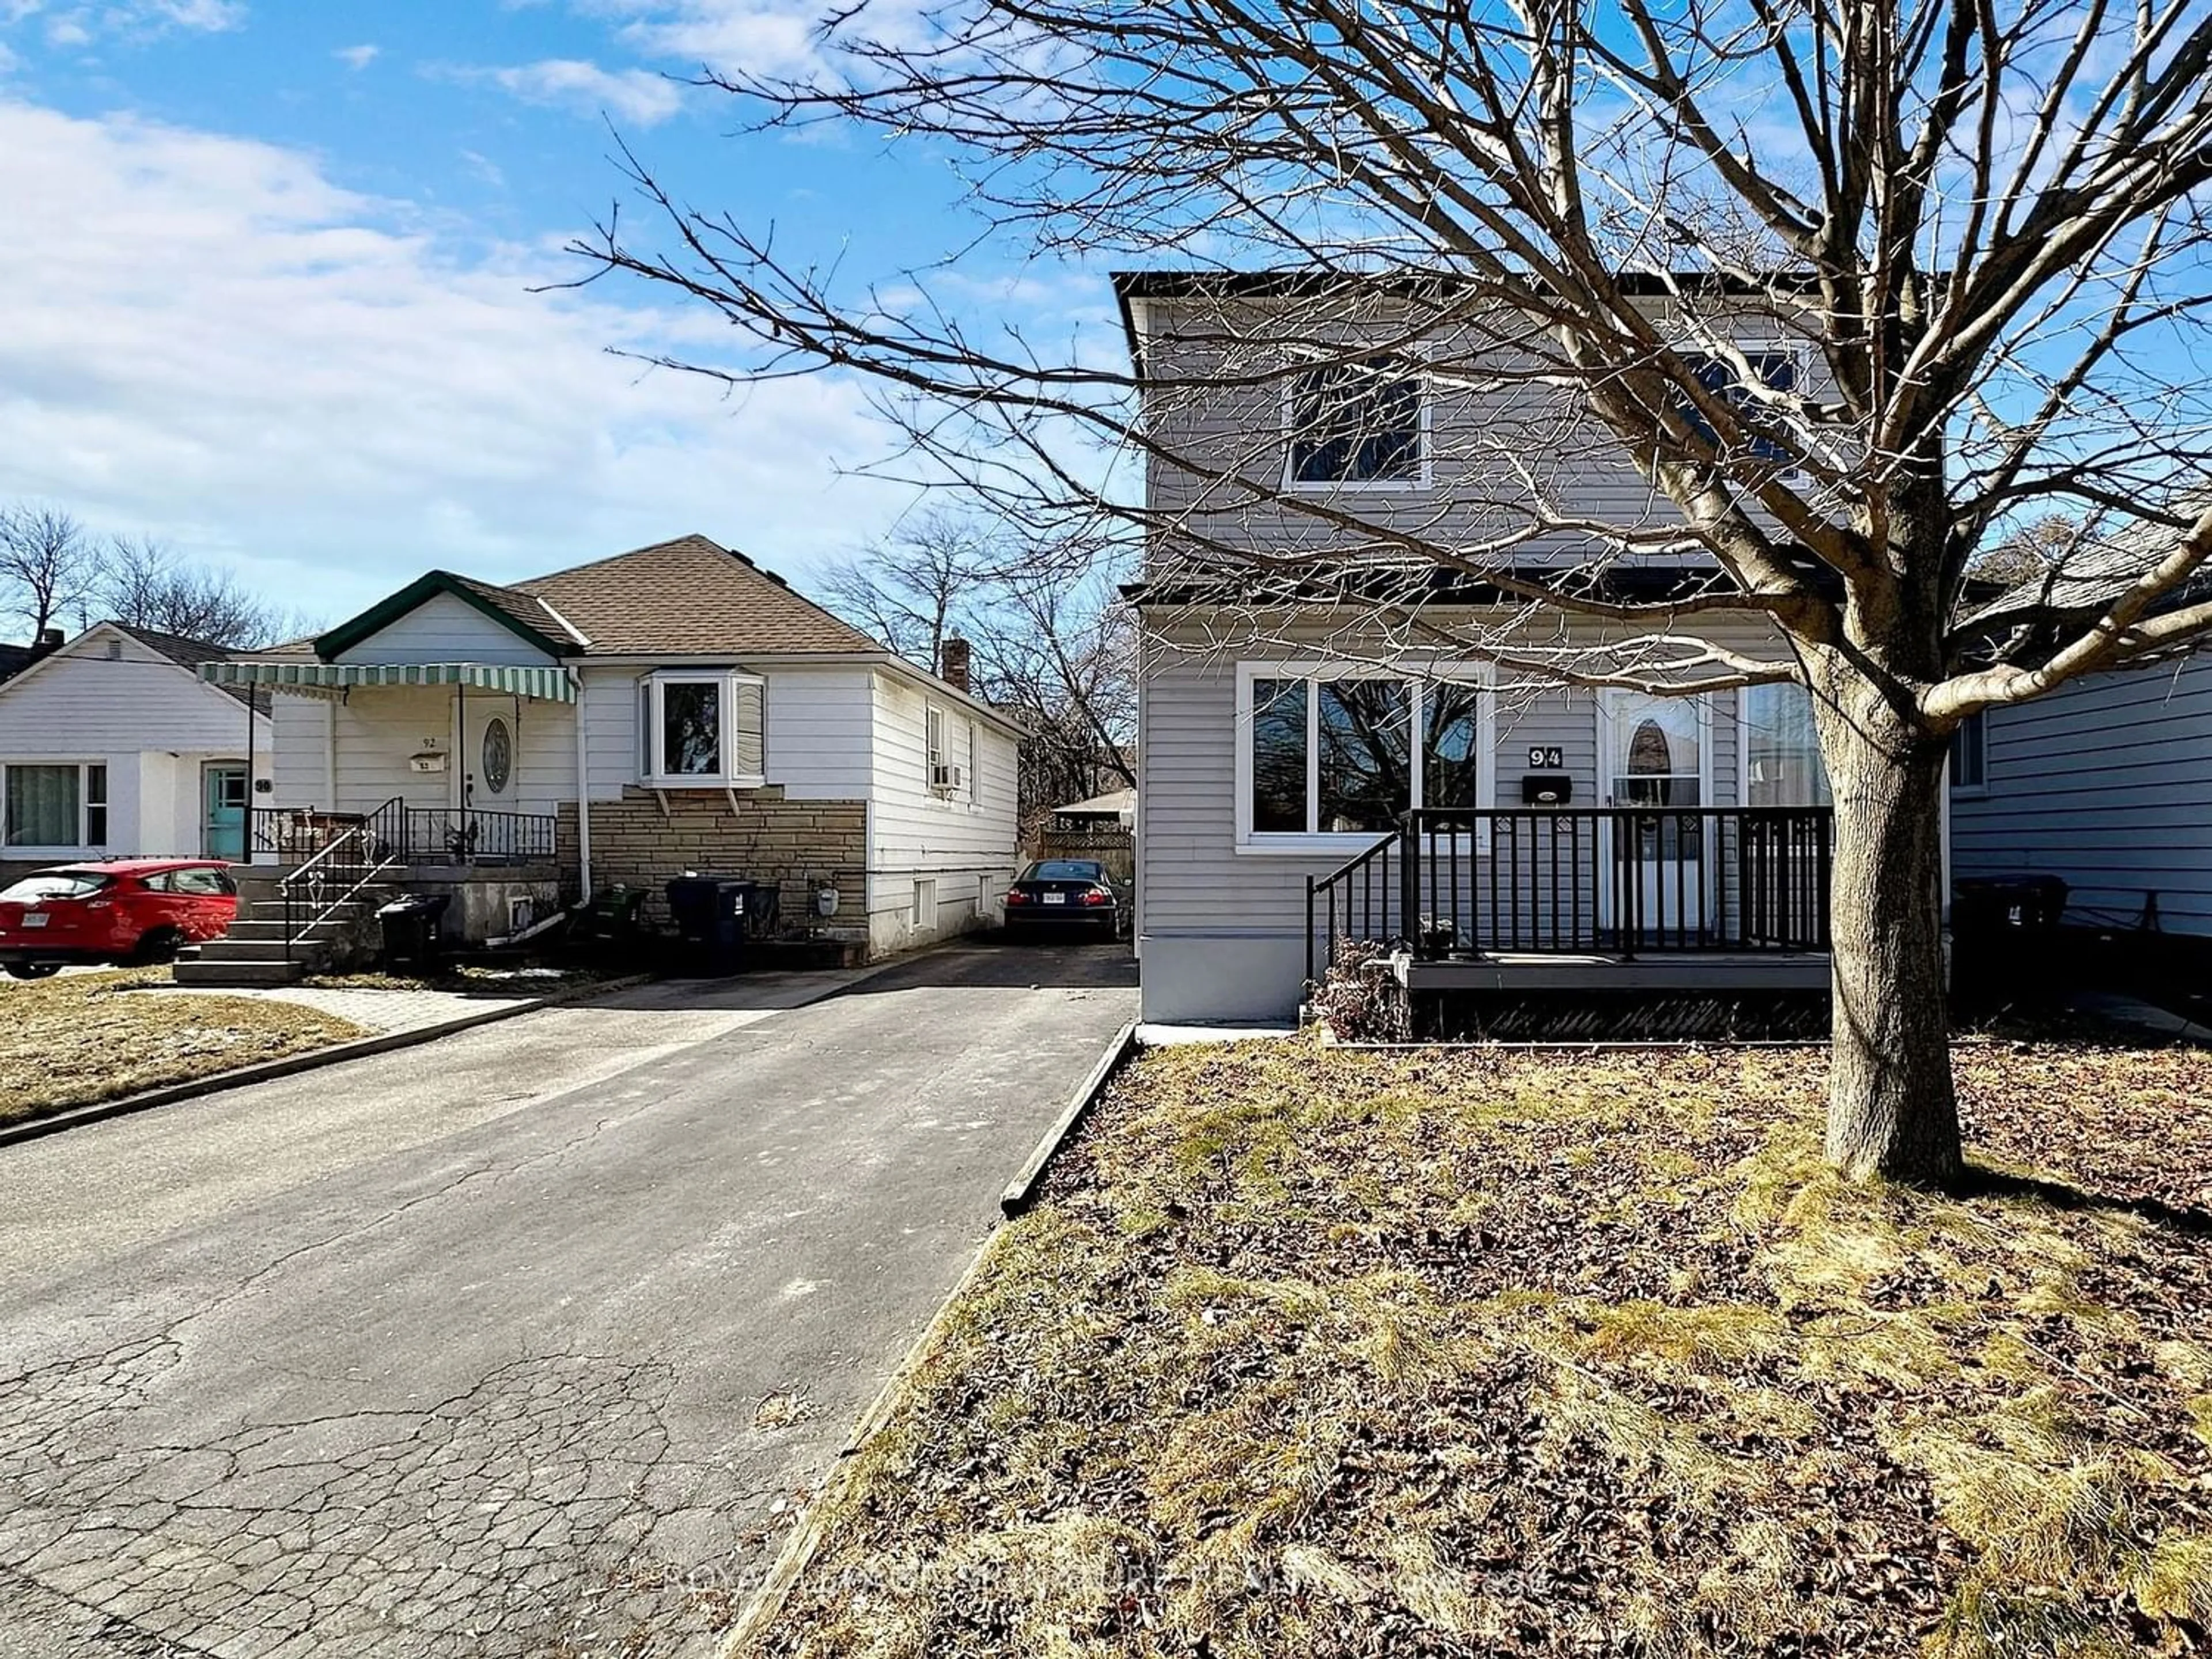 Frontside or backside of a home for 94 Meighen Ave, Toronto Ontario M4B 2H7